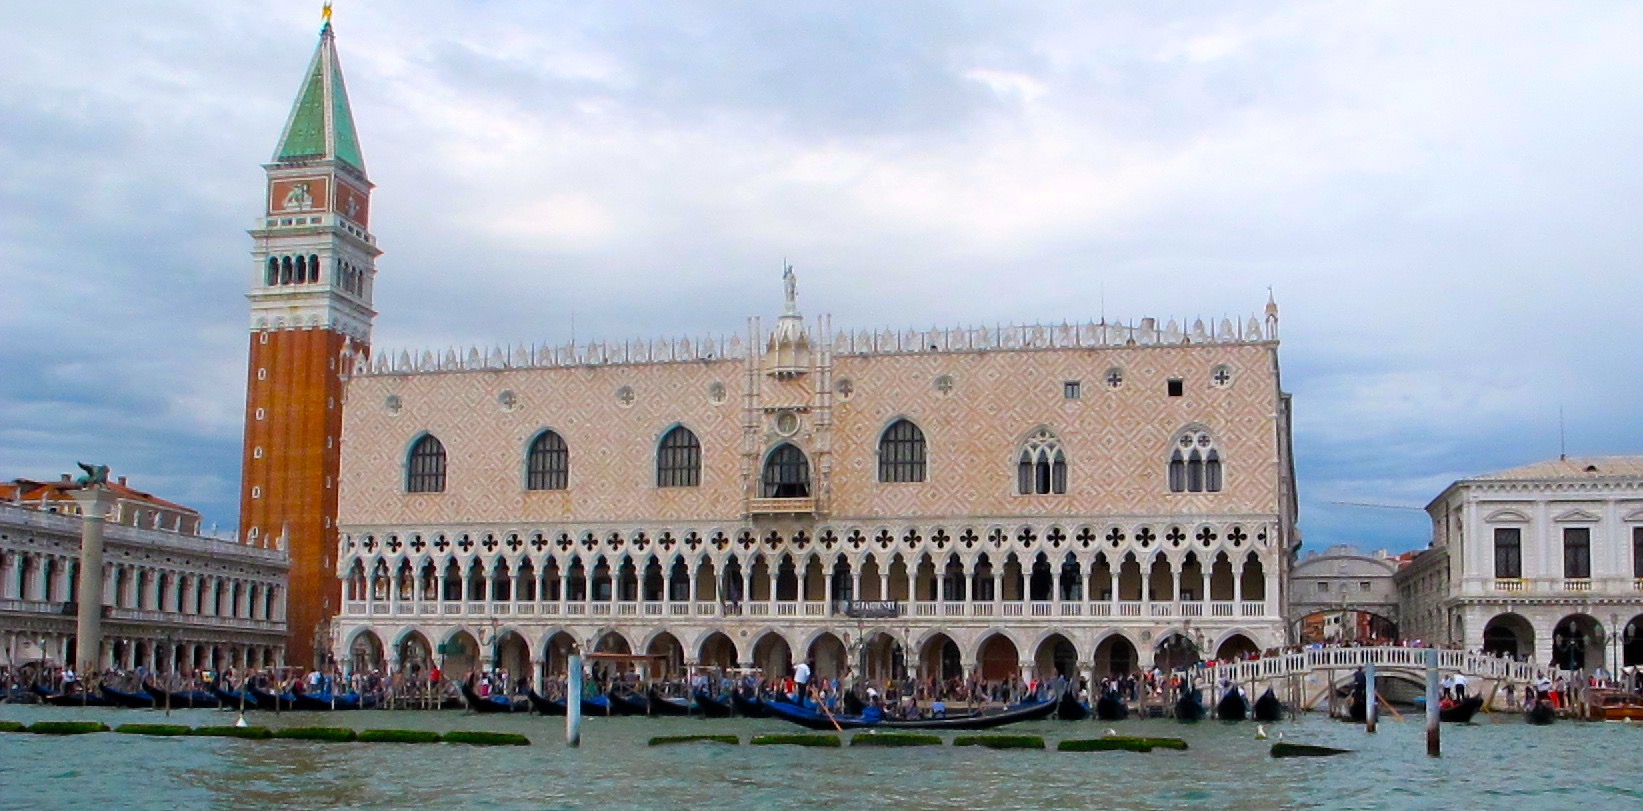 The Doge Palace and Piazza San Marco. Photo by Marla Norman.